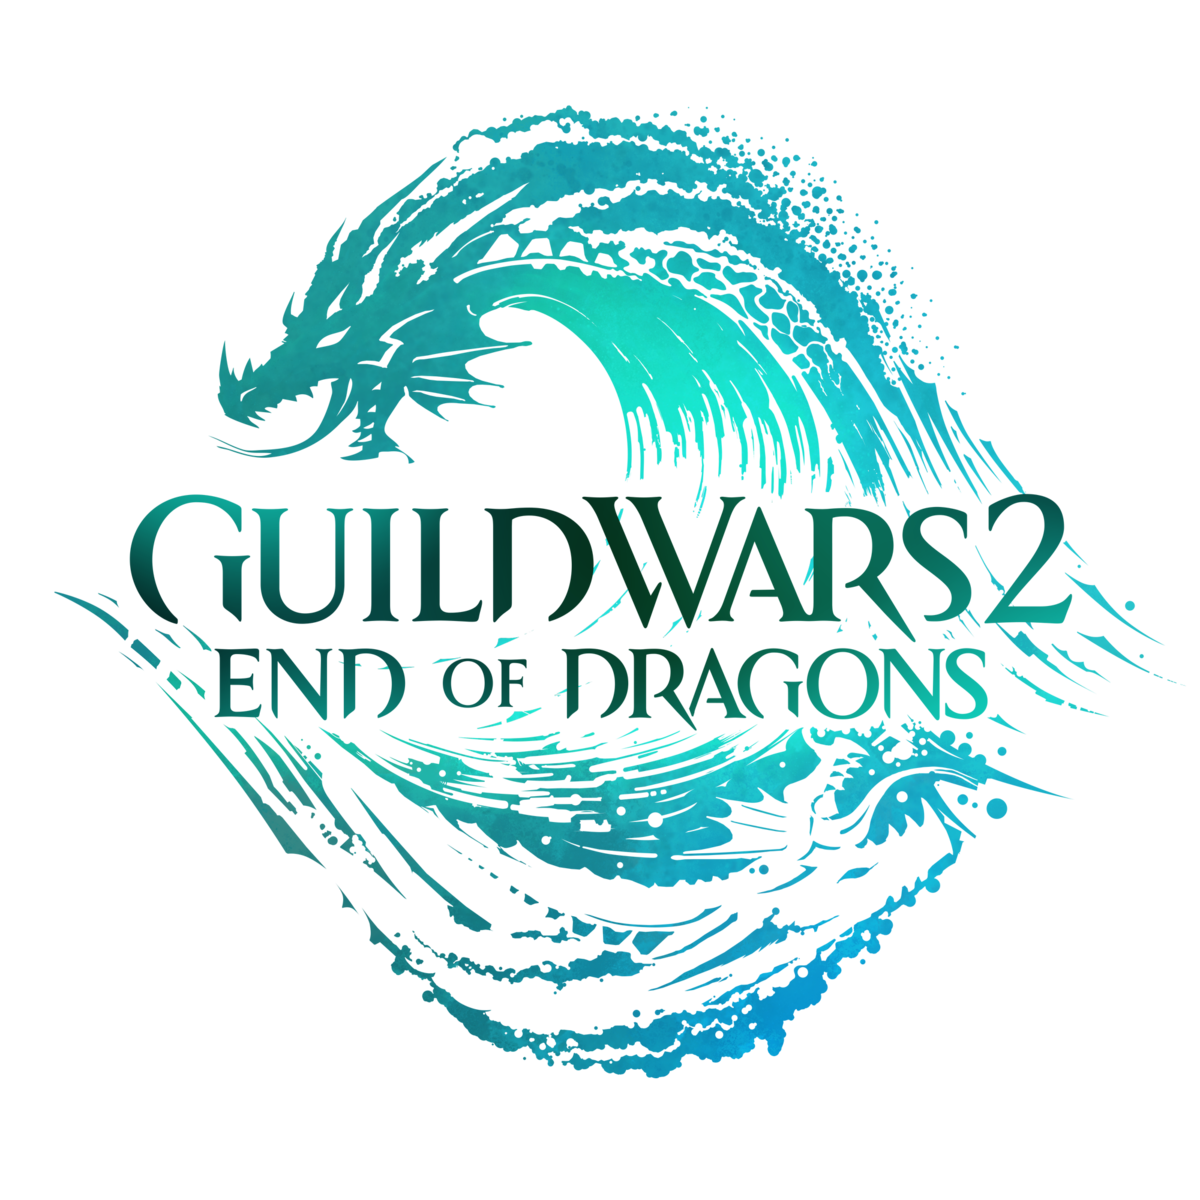 End of Dragons story Guild Wars 2 Wiki (GW2W)